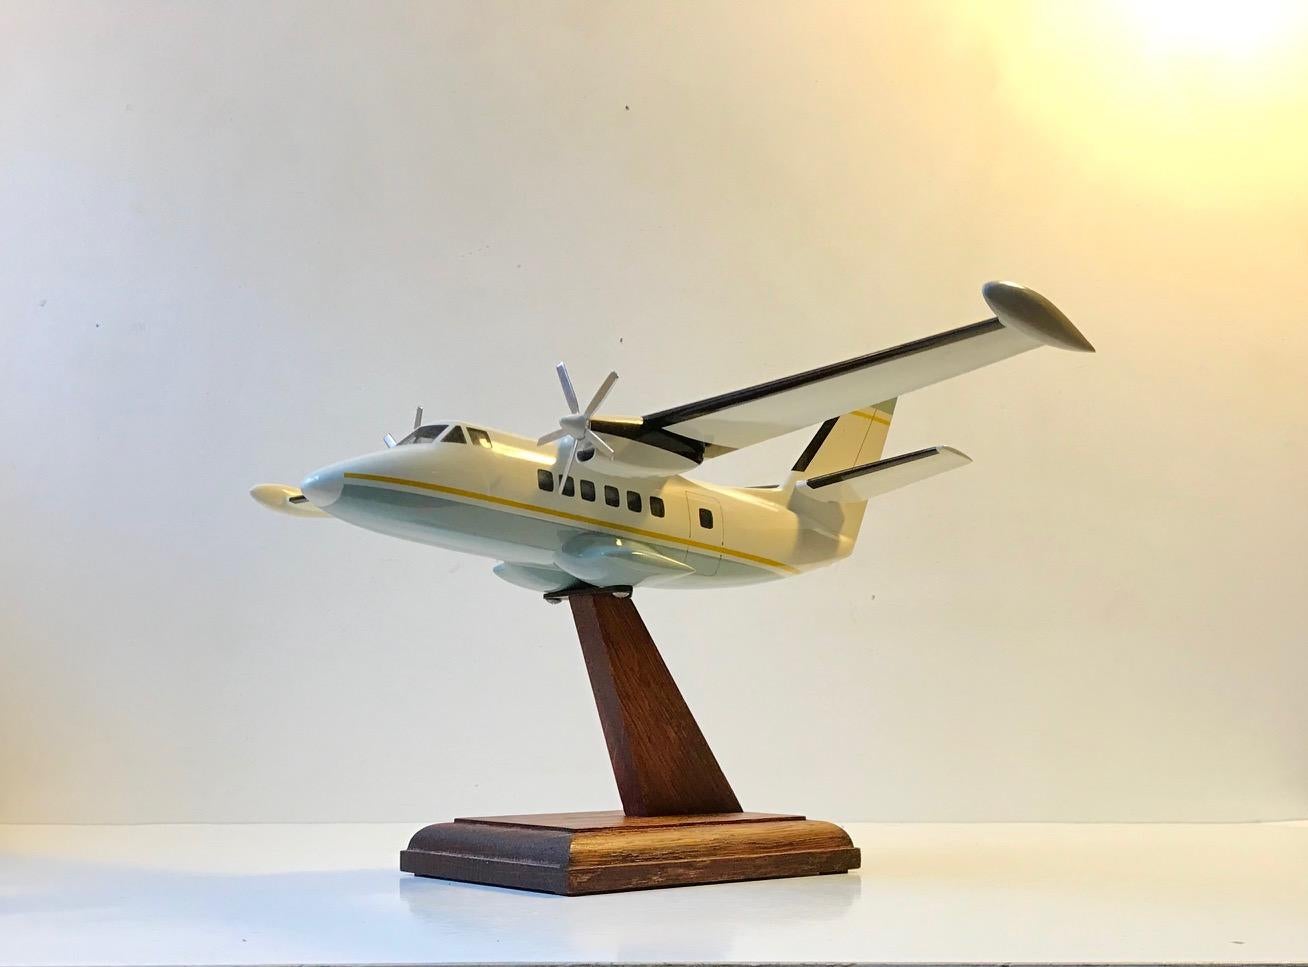 A well-made mounted desk model of an aero plane/private jet. Professionally mounted on an oak stand. Unknown Scandinavian maker, circa 1970-1975. It’s made from lacquered acrylic, tinplate and oak (stand).